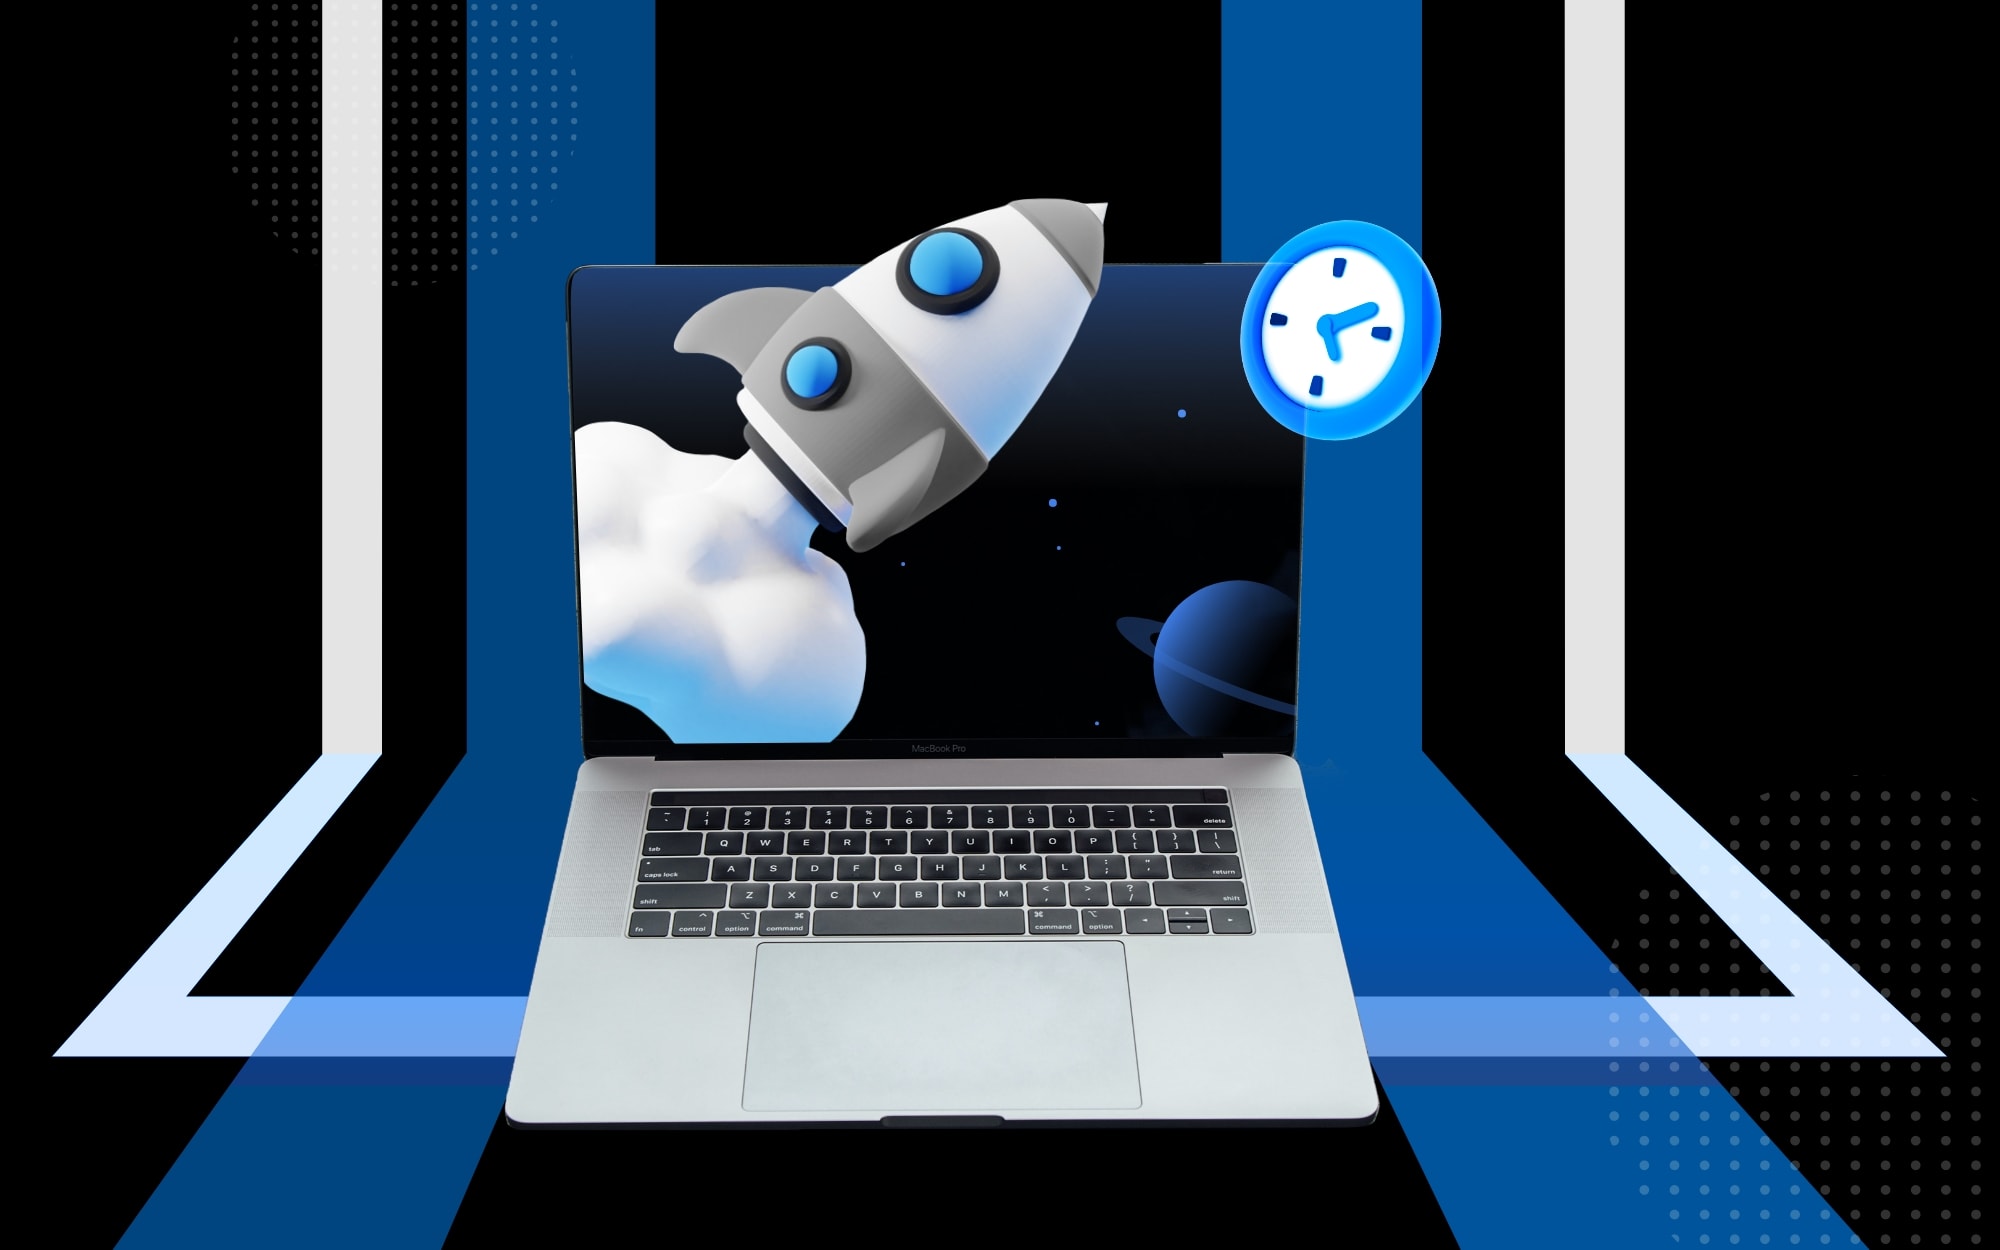 An illustration of a computer with a rocket and clock sit on a black background with blue and white details